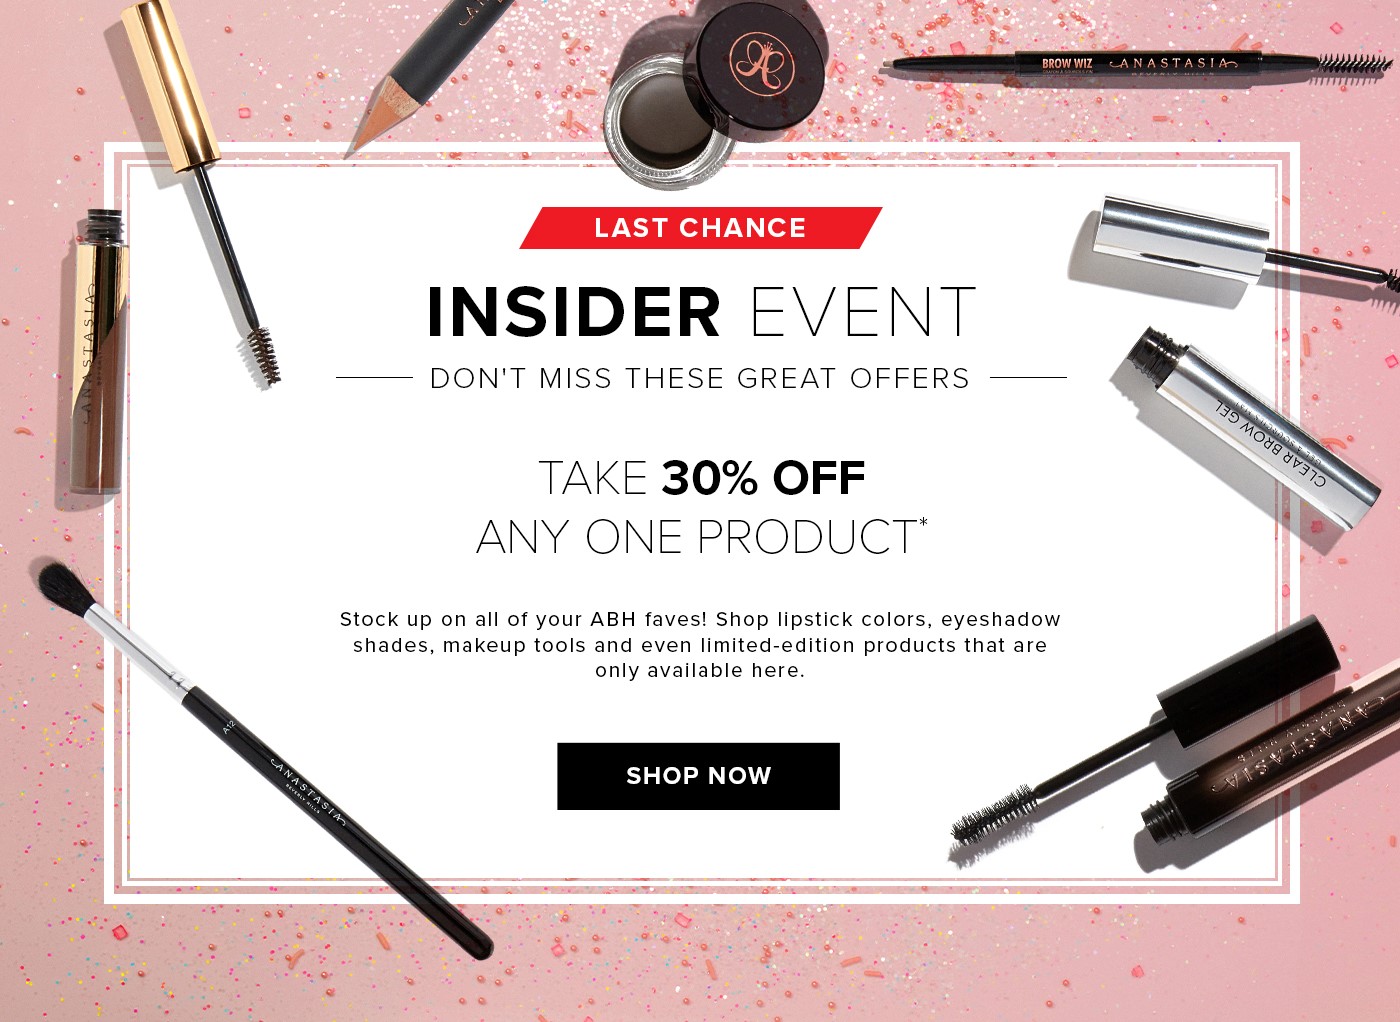 INSIDER EVENT - DON''T MISS THESE GREAT OFFERS - TAKE 30% OFF ANY ONE PRODUCT* Stock up on all your ABH faves! Shop lipstick colors, eyeshadow shades, makeup tools, and even limited-edition products that are only available here. SHOP NOW